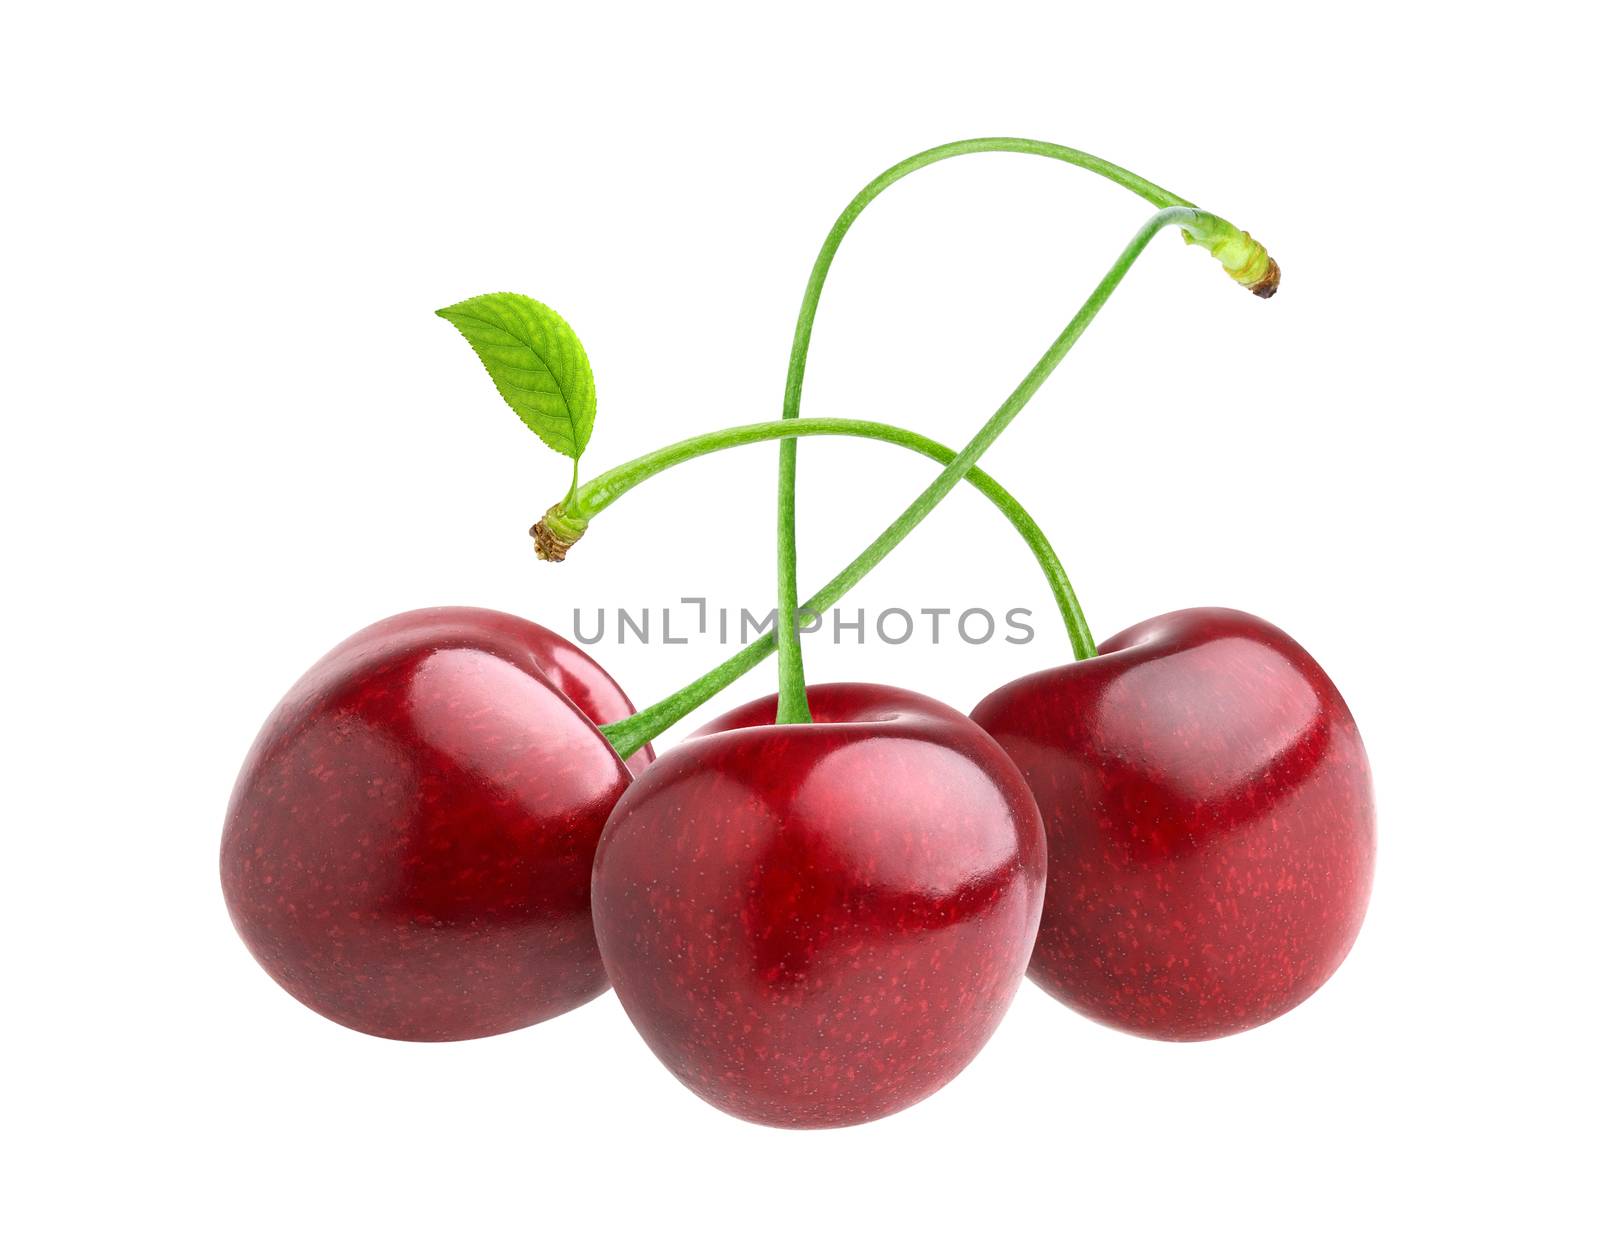 Cherries isolated on white background with clipping path by xamtiw